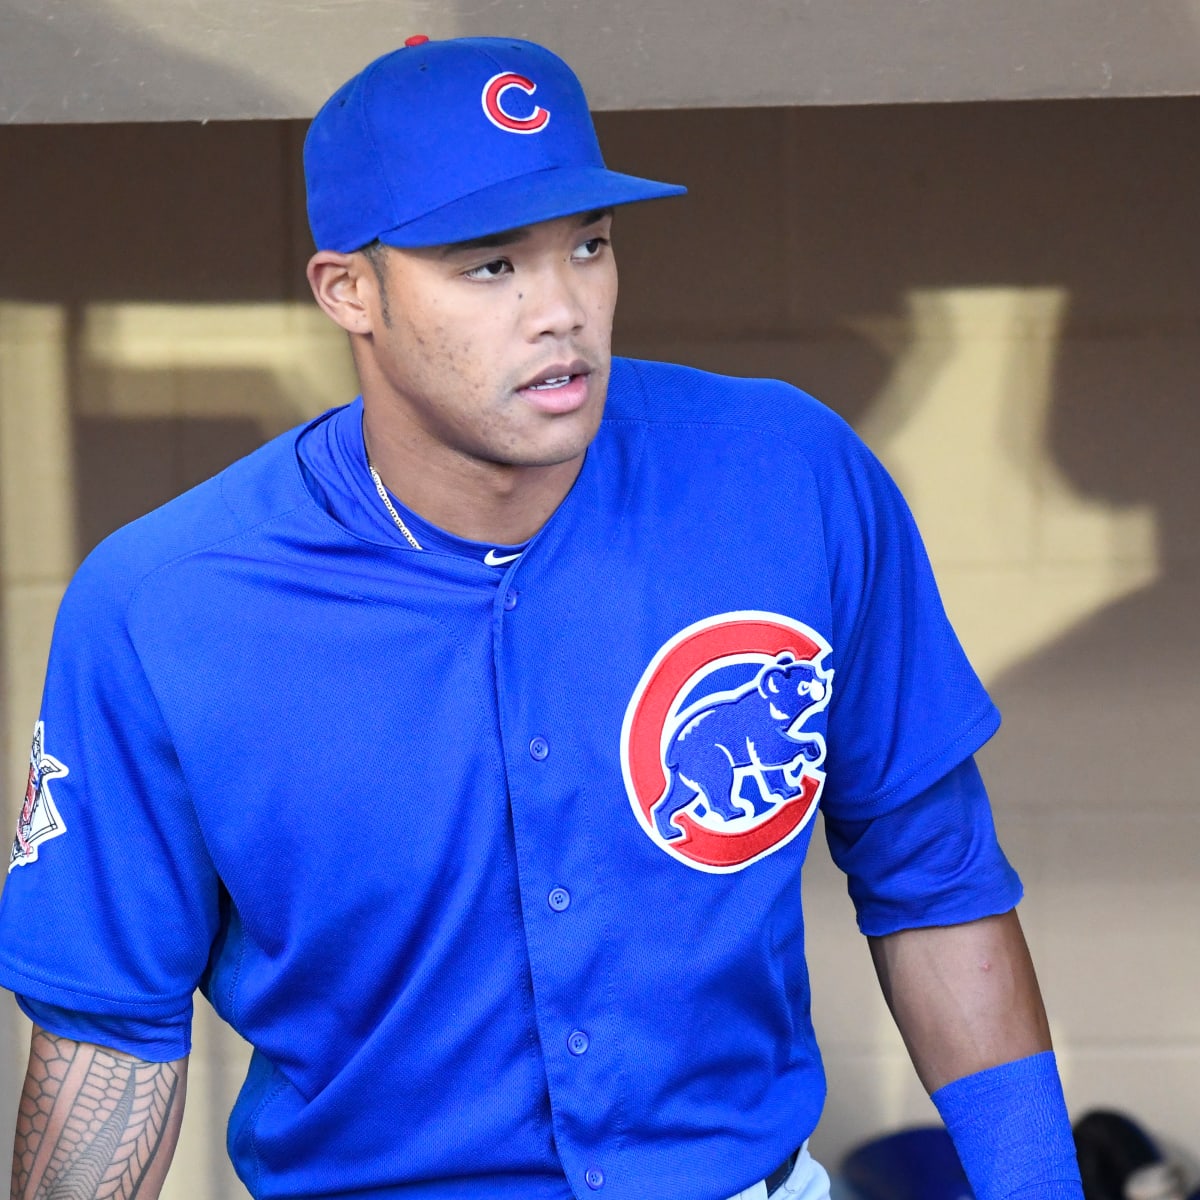 Addison Russell contract: Cubs tender deal during suspension